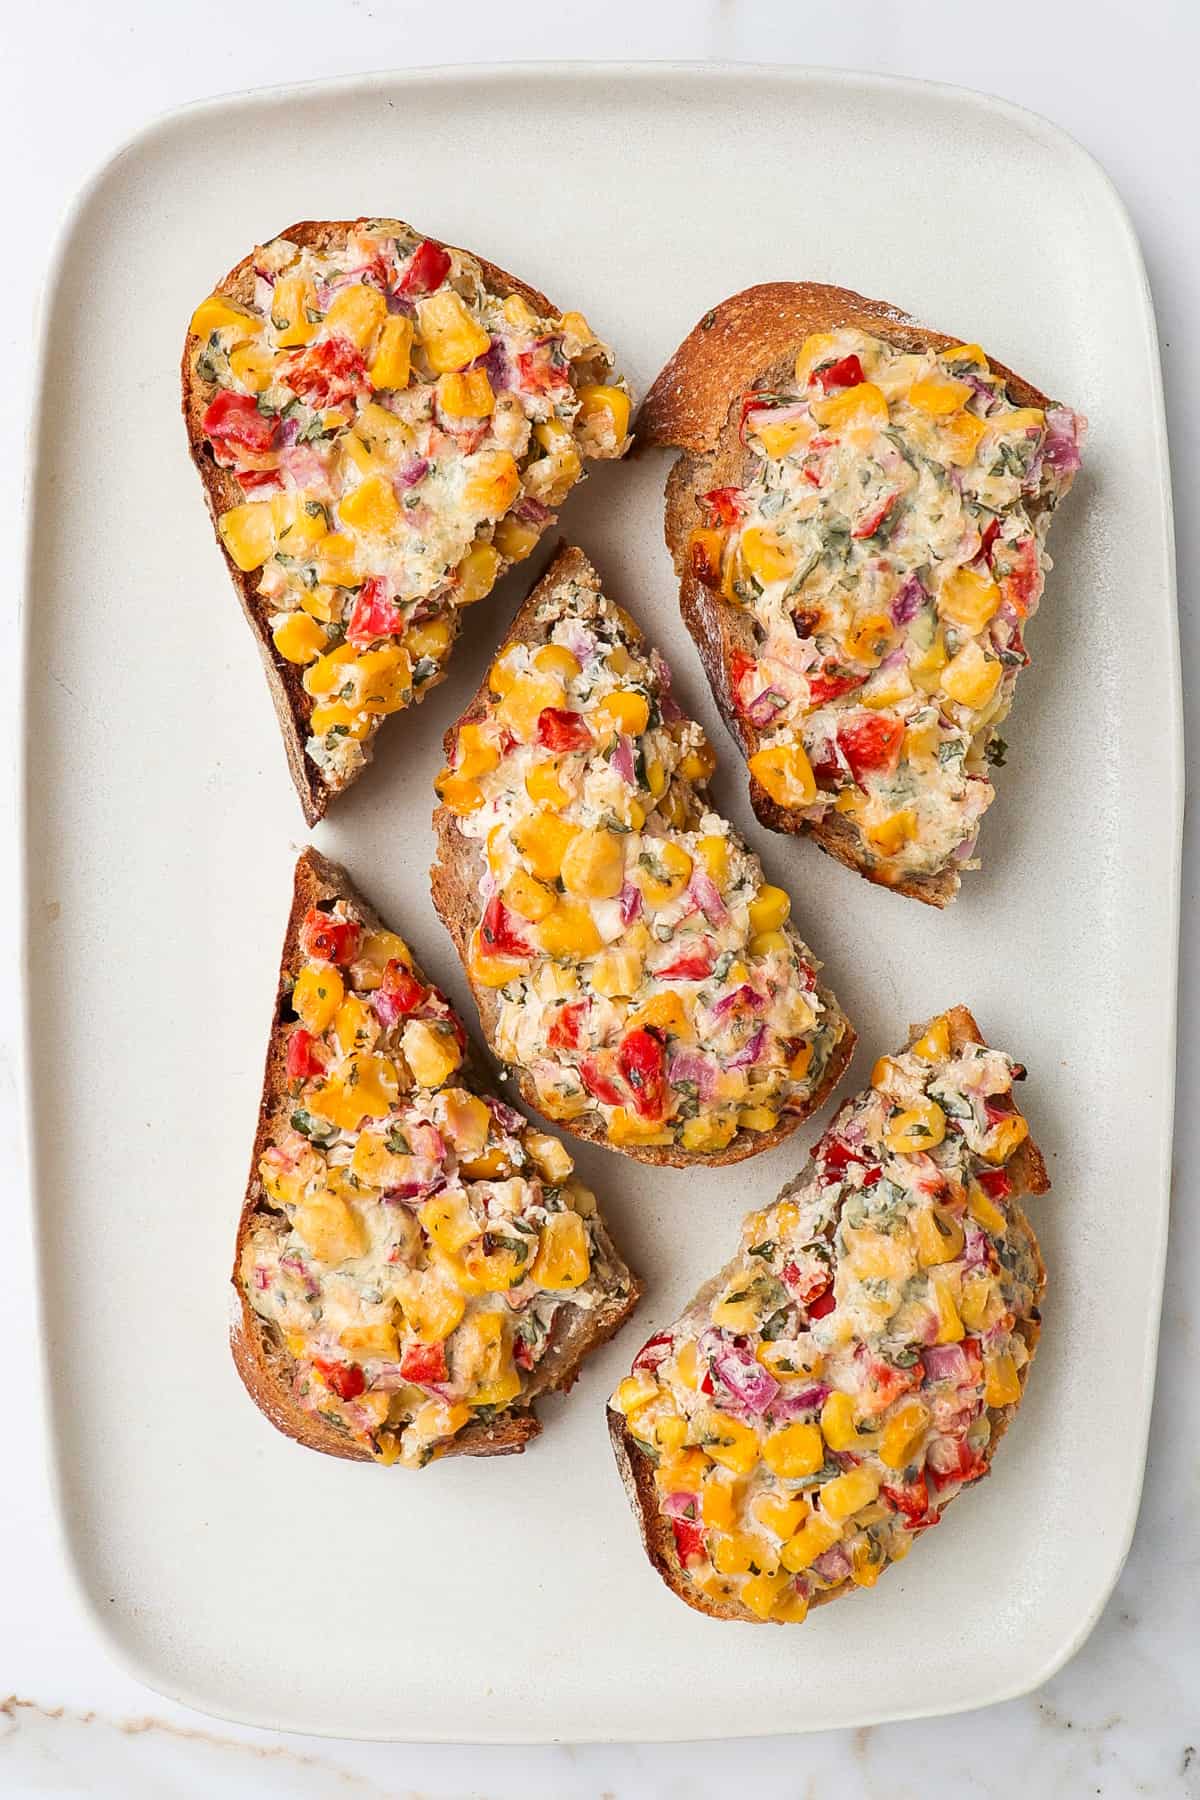 Cut up corn toasts on a platter.